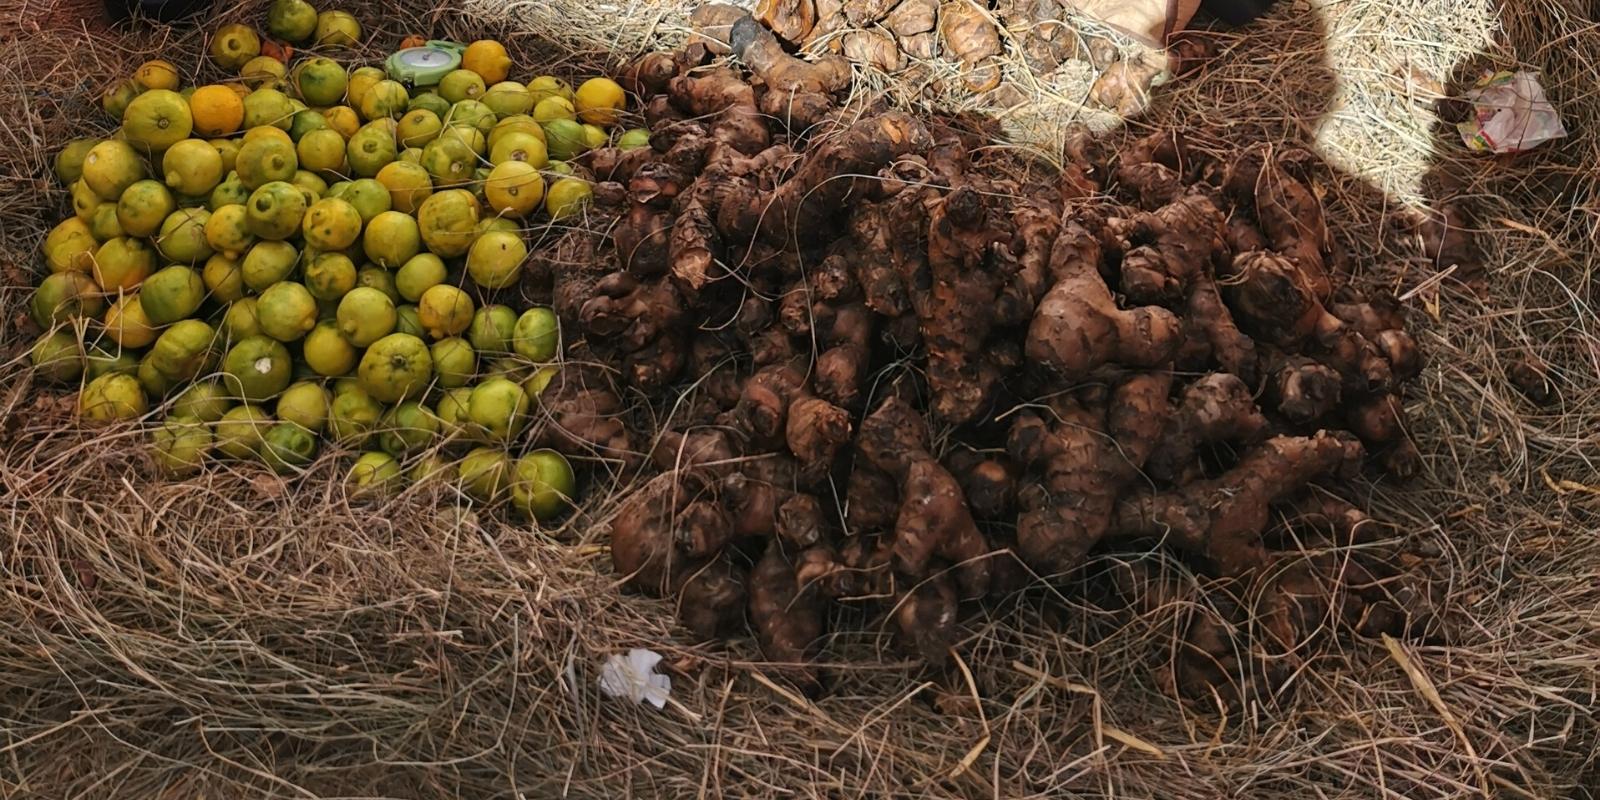 TUBERS CULTIVATED BY THE INCAS